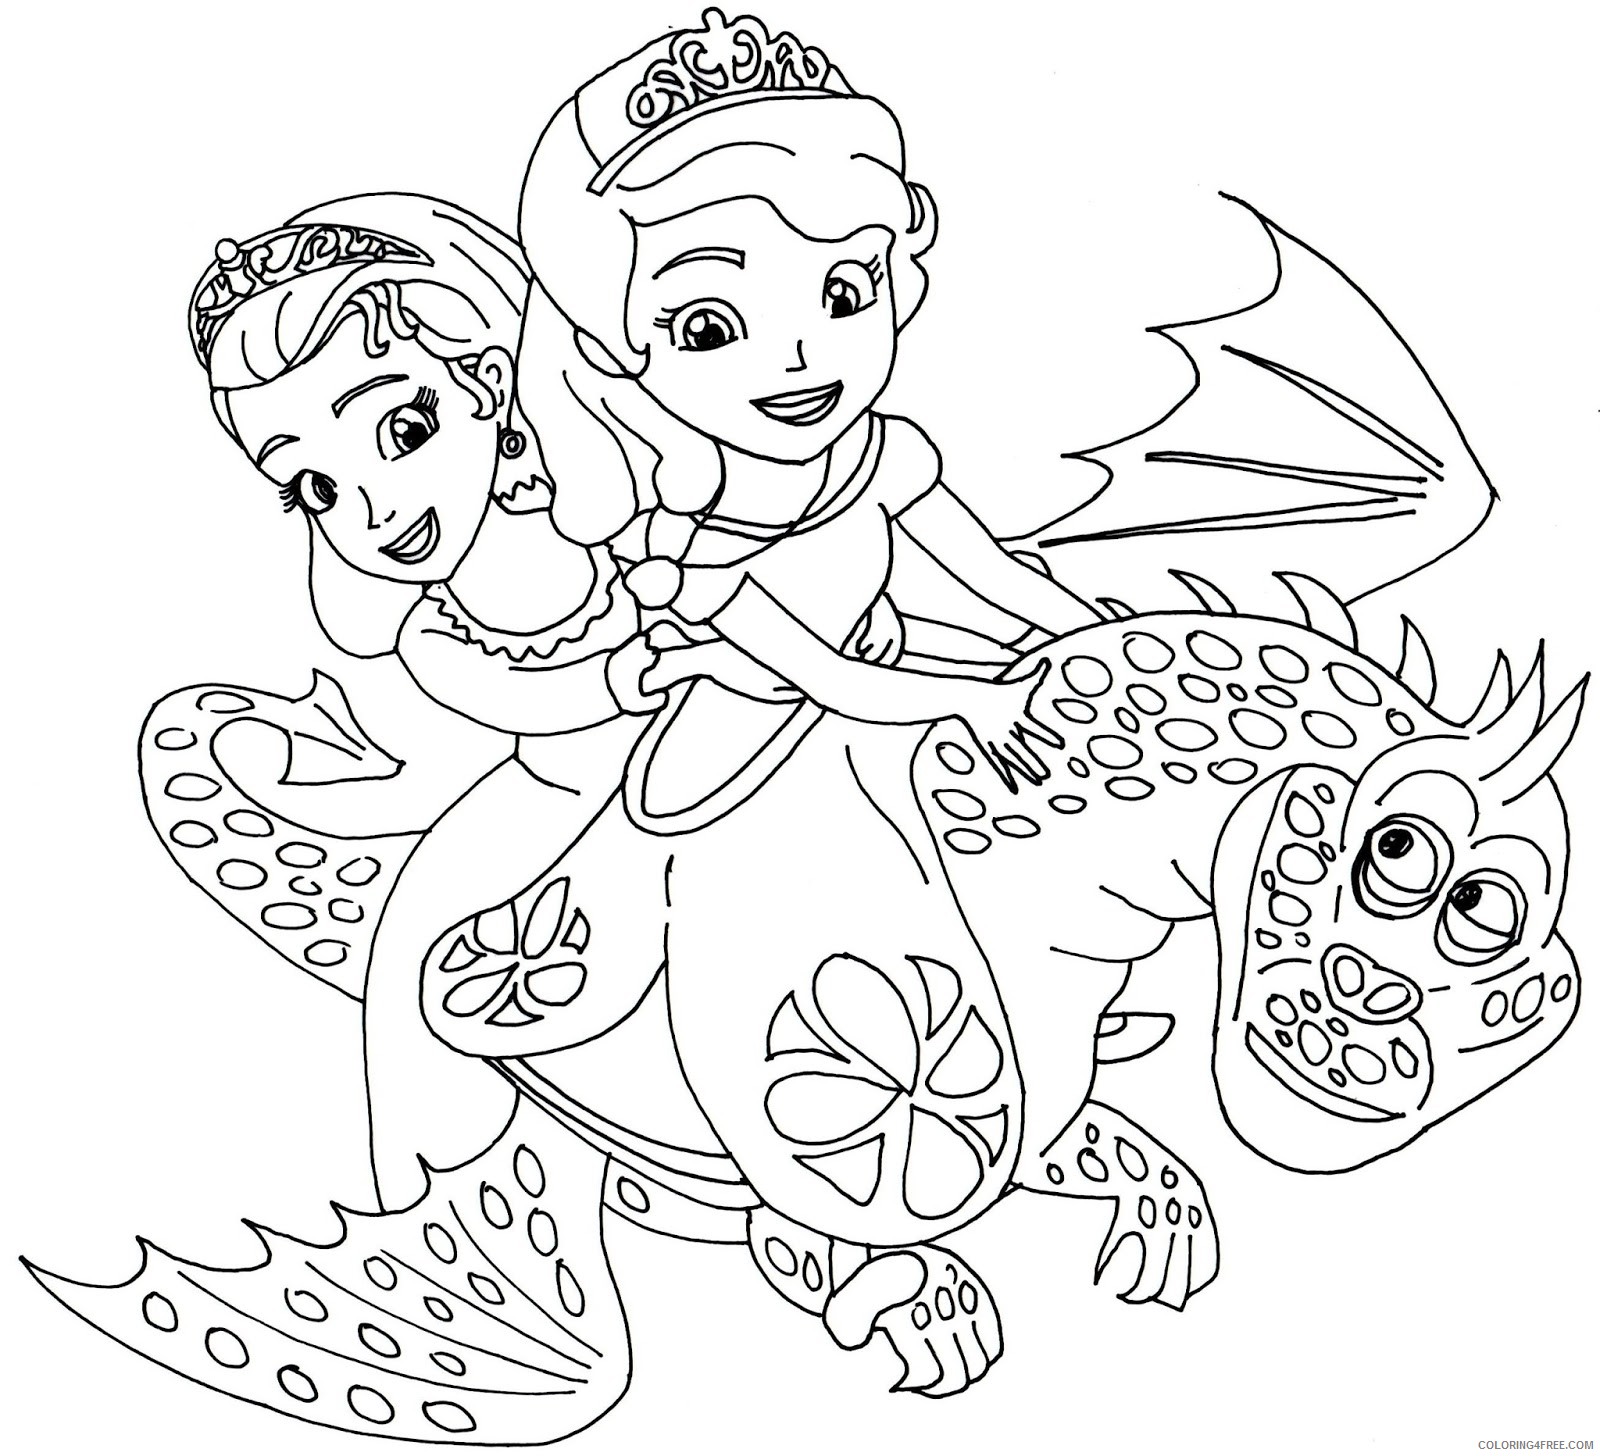 sofia the first coloring pages the curse of princess ivy Coloring4free